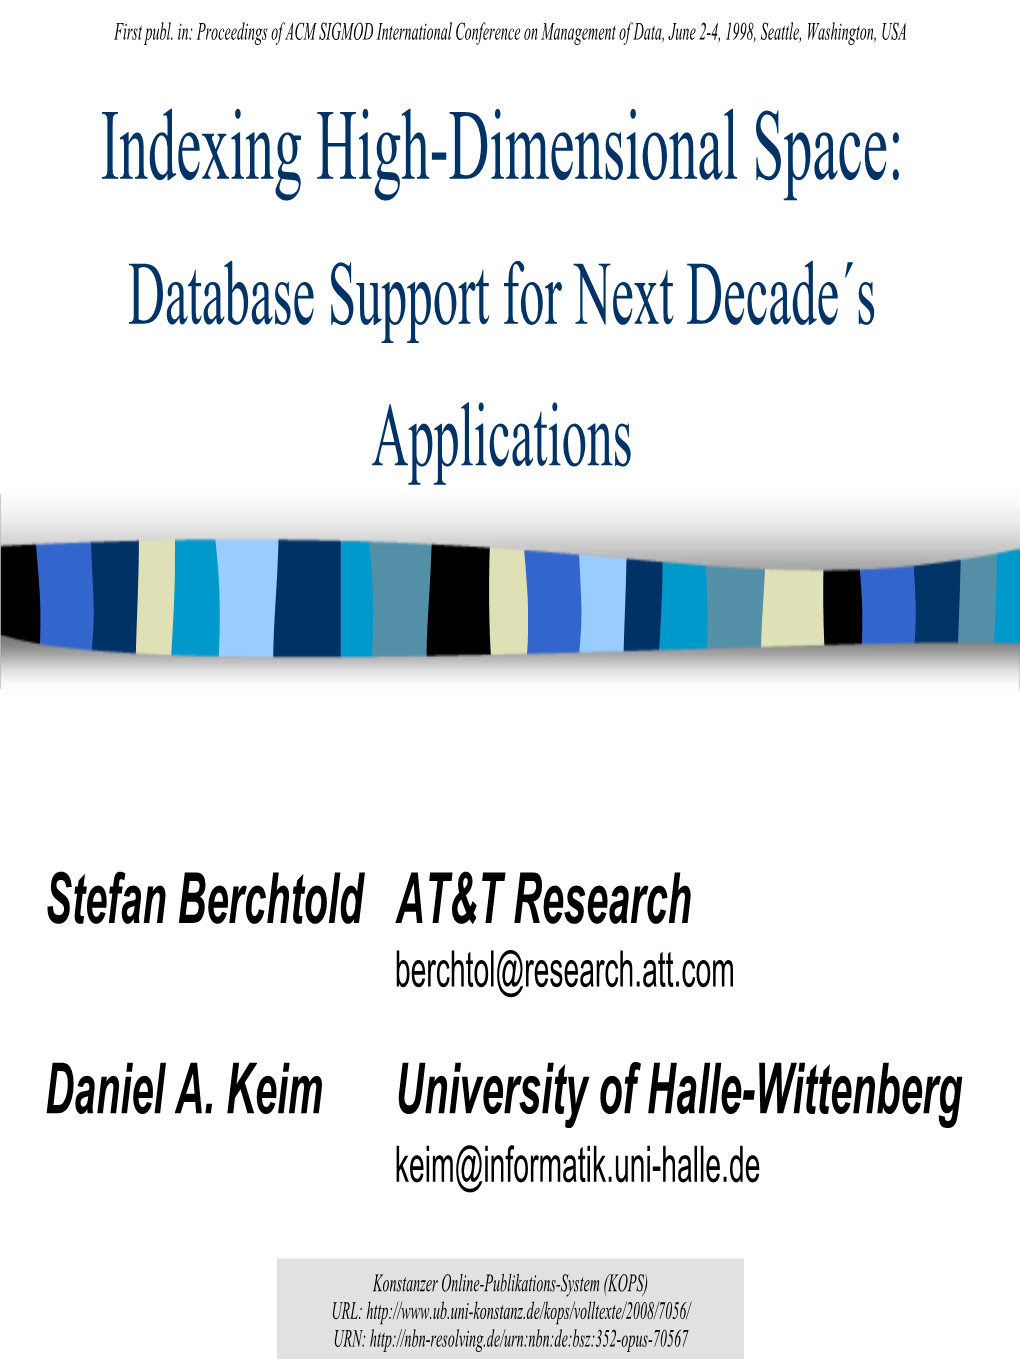 Indexing High-Dimensional Space : Database Support for Next